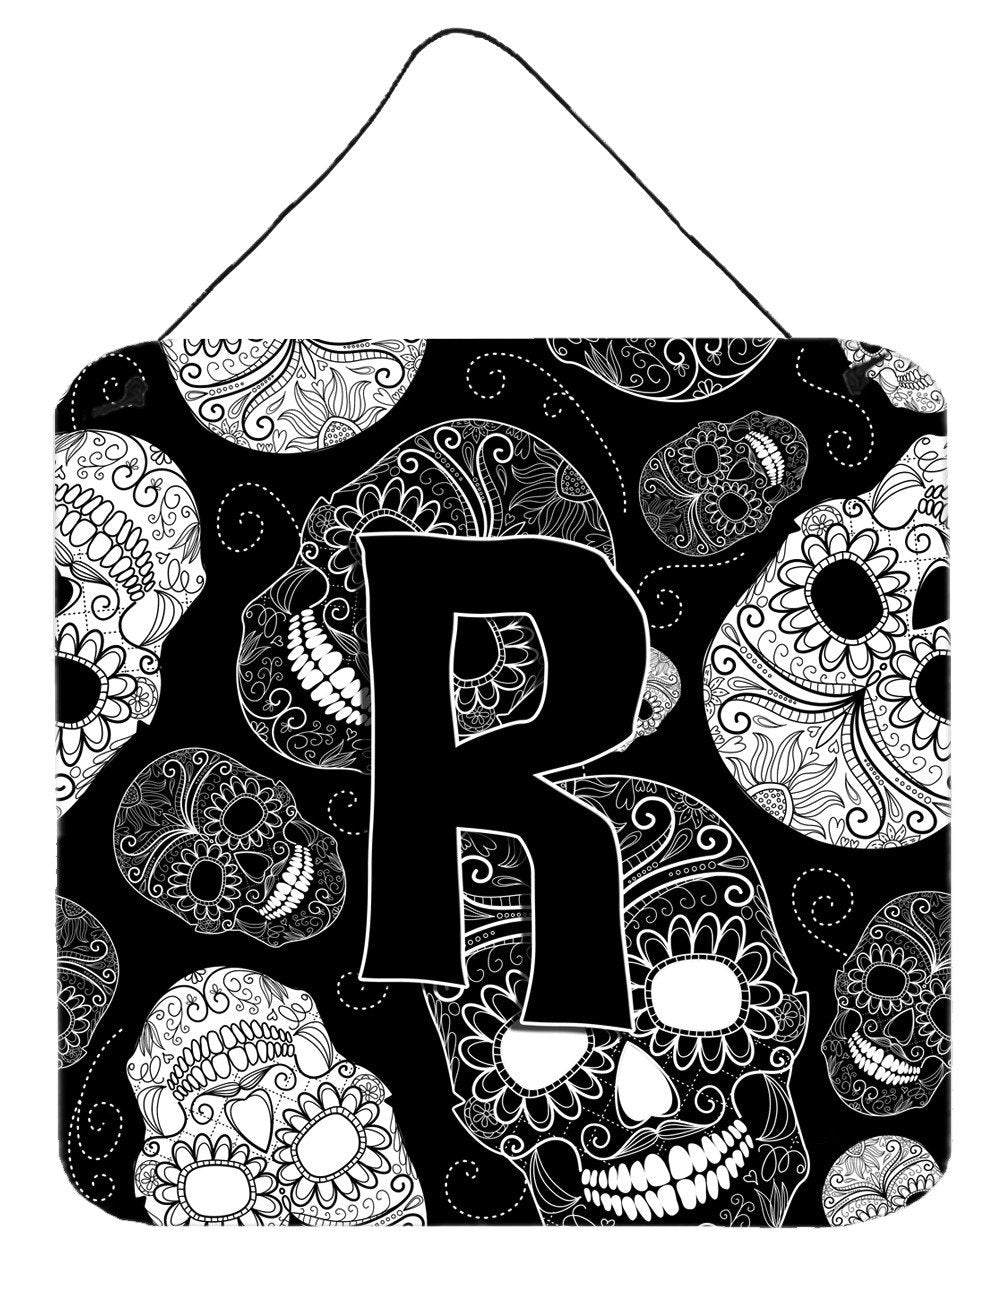 Letter R Day of the Dead Skulls Black Wall or Door Hanging Prints CJ2008-RDS66 by Caroline's Treasures